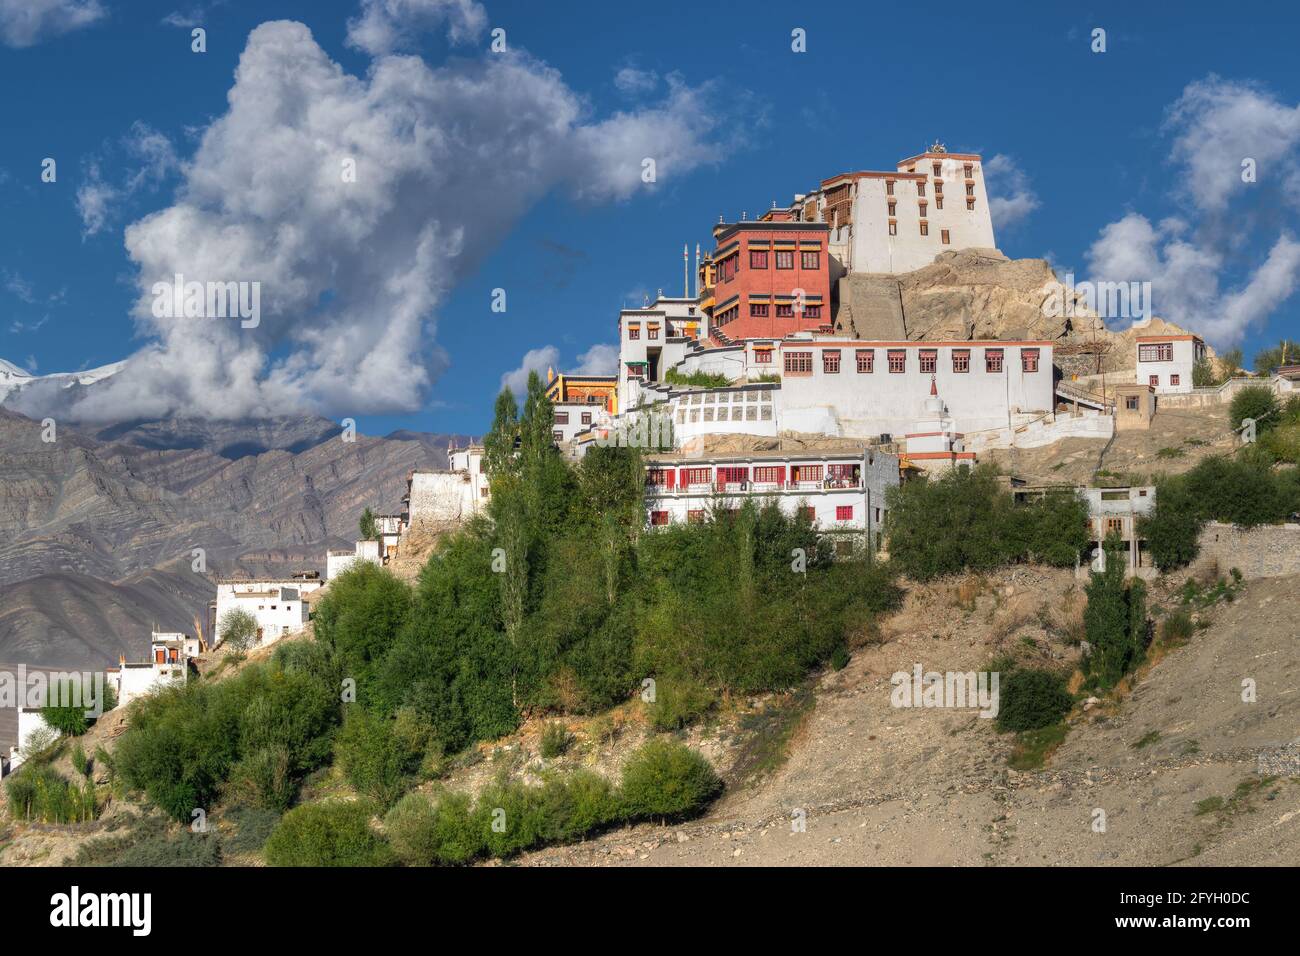 Thiksay monastery with view of Himalayan mountians and blue sky in background,Ladakh,Jammu and Kashmir, India Stock Photo